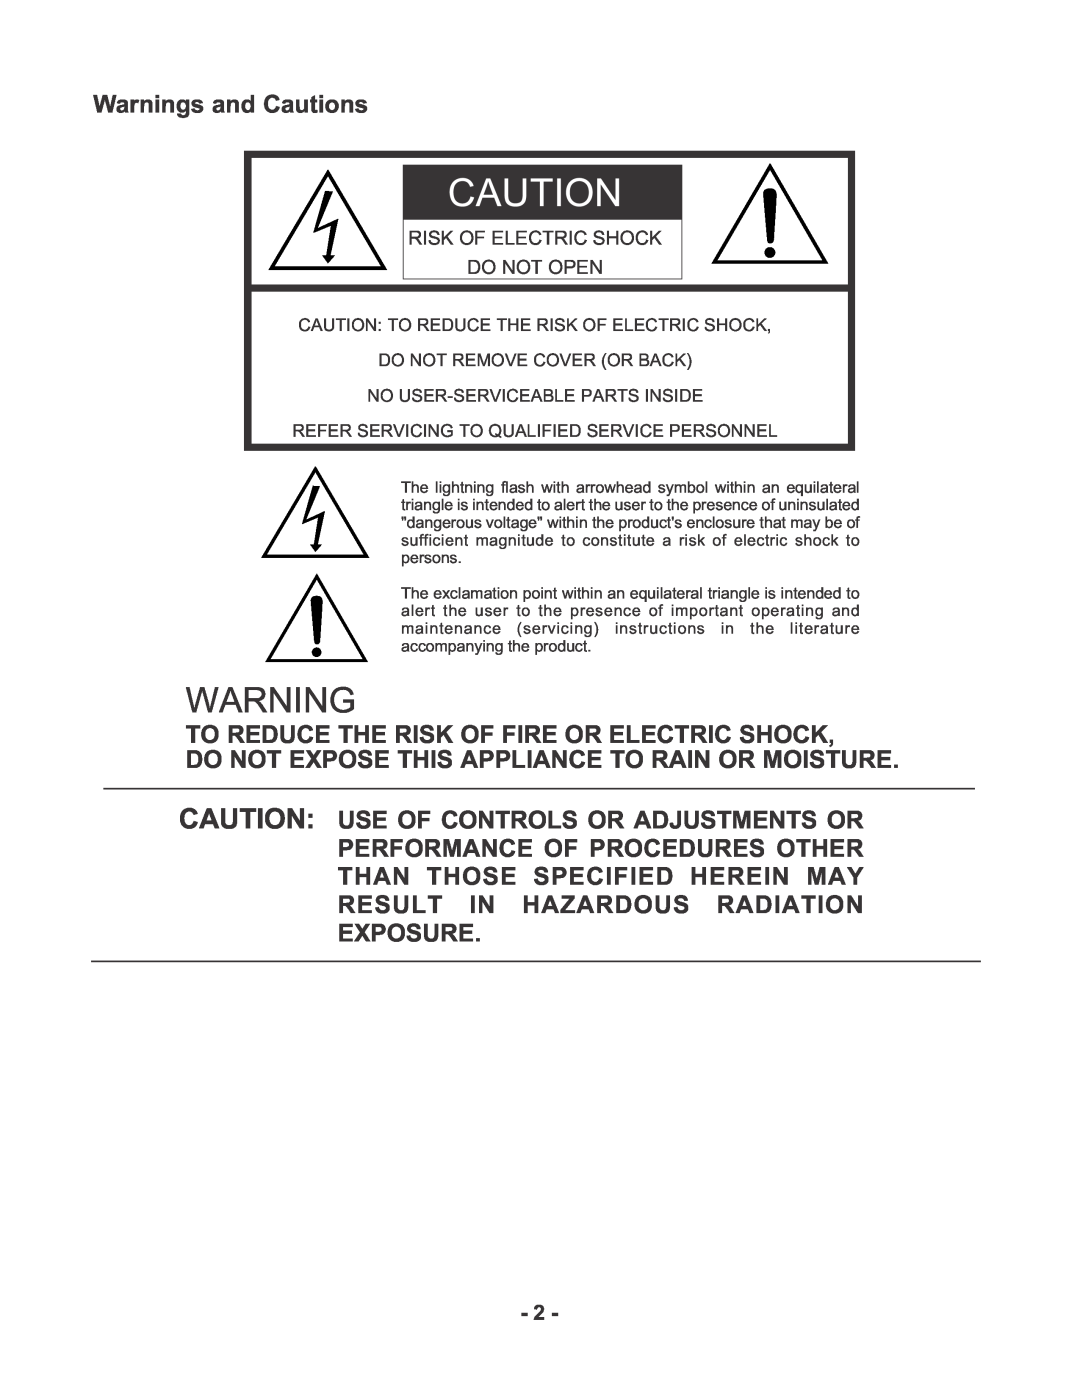 Marantz PMD670 Warnings and Cautions, To Reduce The Risk Of Fire Or Electric Shock, Risk Of Electric Shock, Do Not Open 